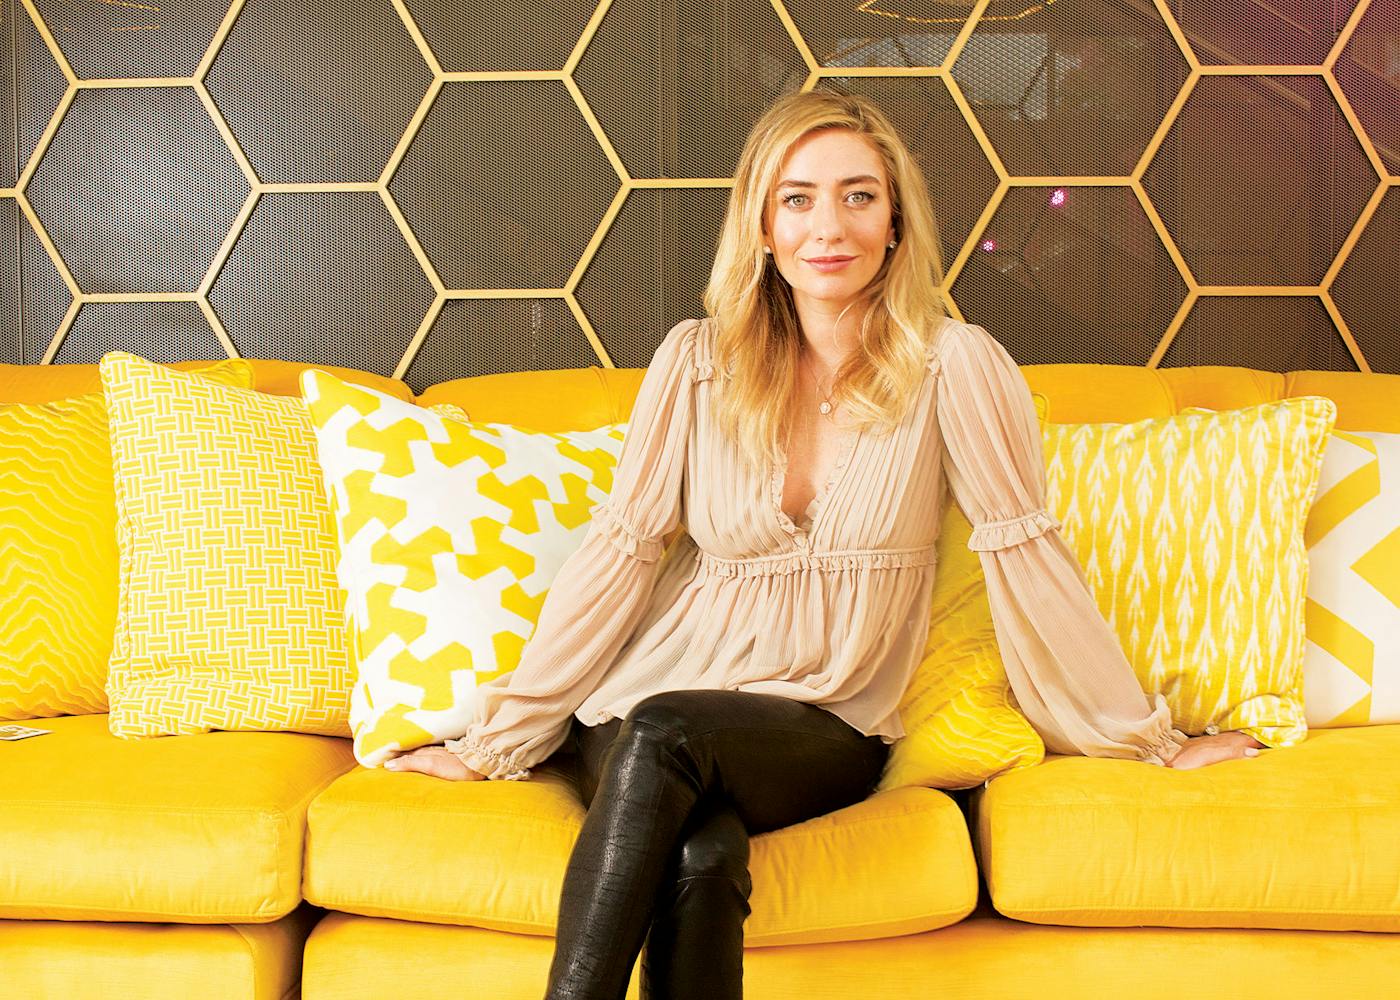 Hot Blonde Teen Fucked Hard - How Whitney Wolfe Herd Changed the Dating Game â€“ Texas Monthly